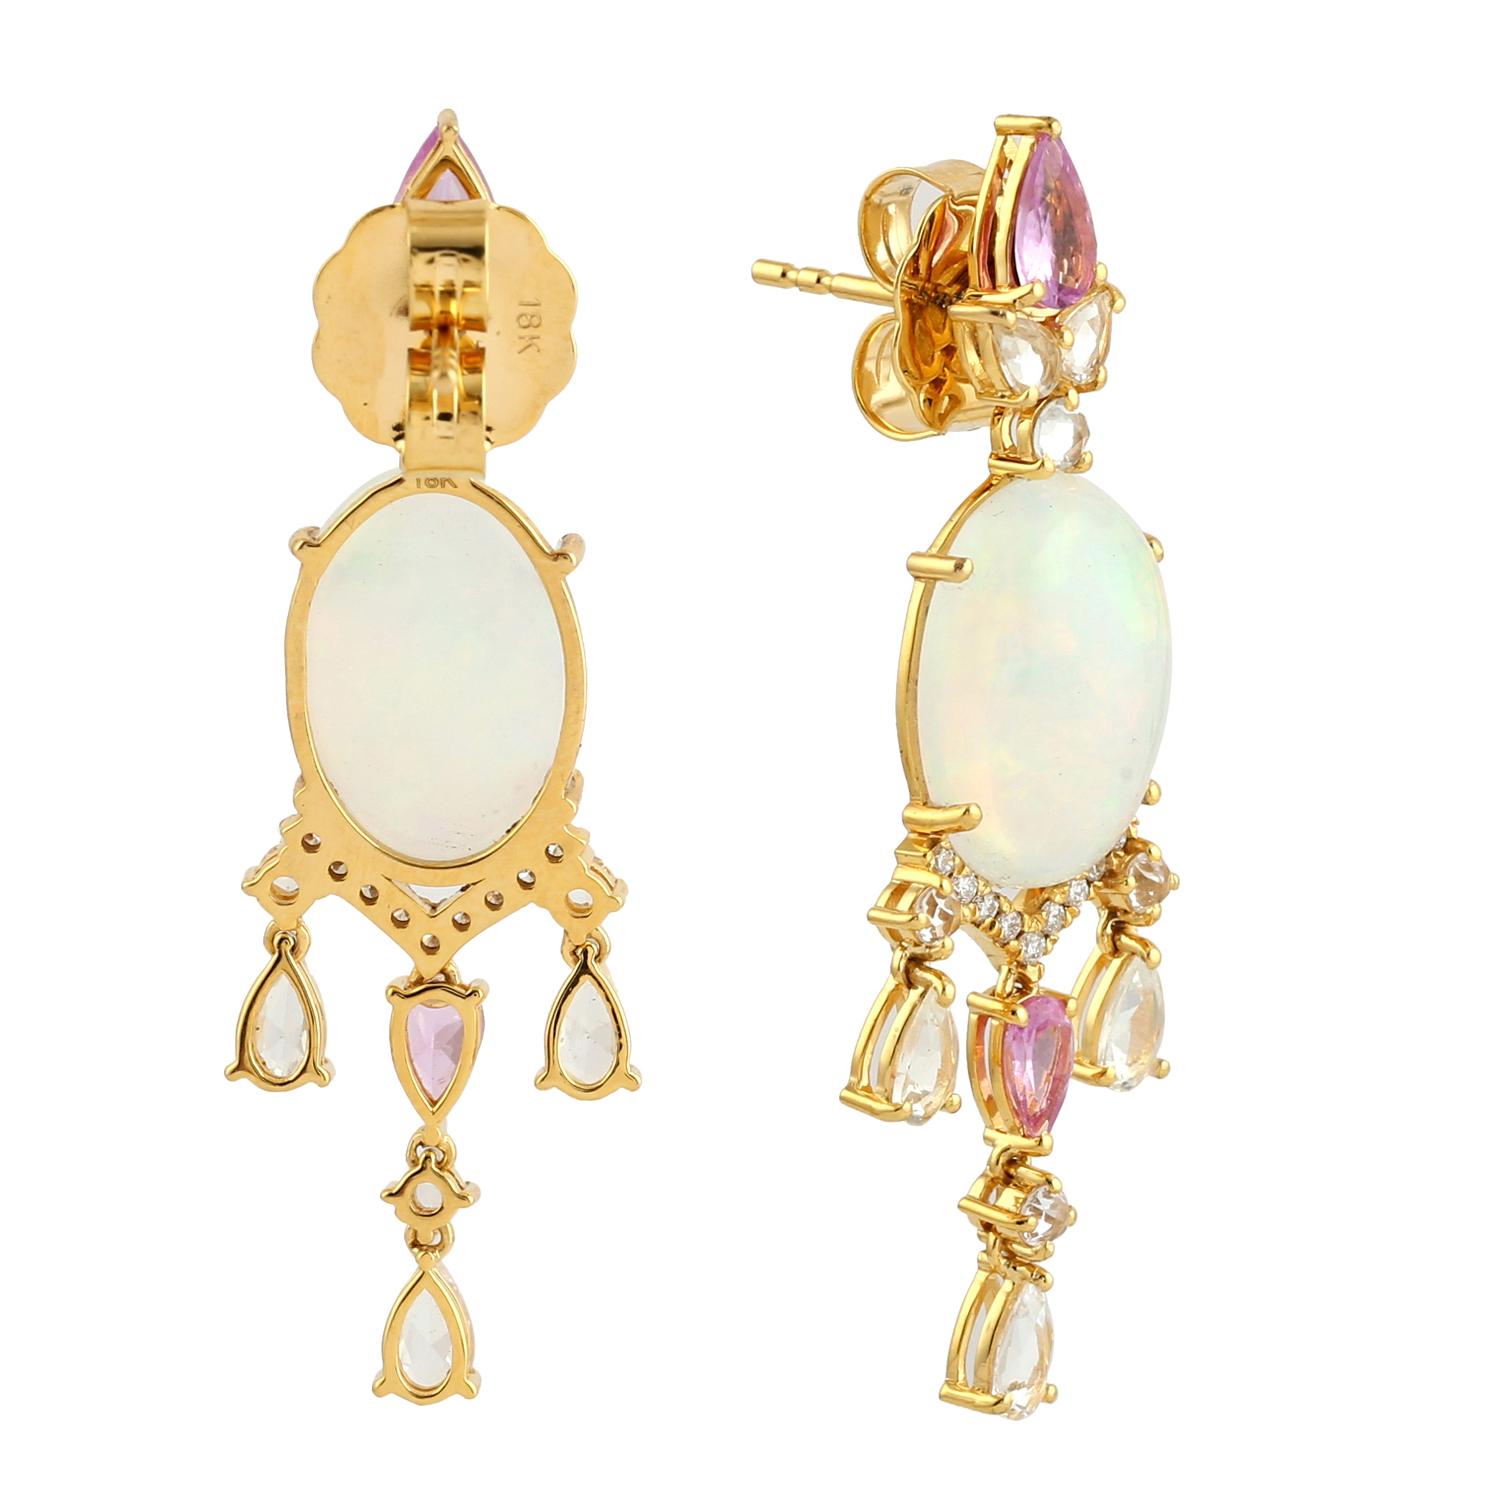 Cast in 14 karat gold. These stud earrings are hand set in 6.03 carats Ethiopian opal, 3.46 carats pink sapphire and .13 carats of sparkling diamonds. 

FOLLOW MEGHNA JEWELS storefront to view the latest collection & exclusive pieces. Meghna Jewels